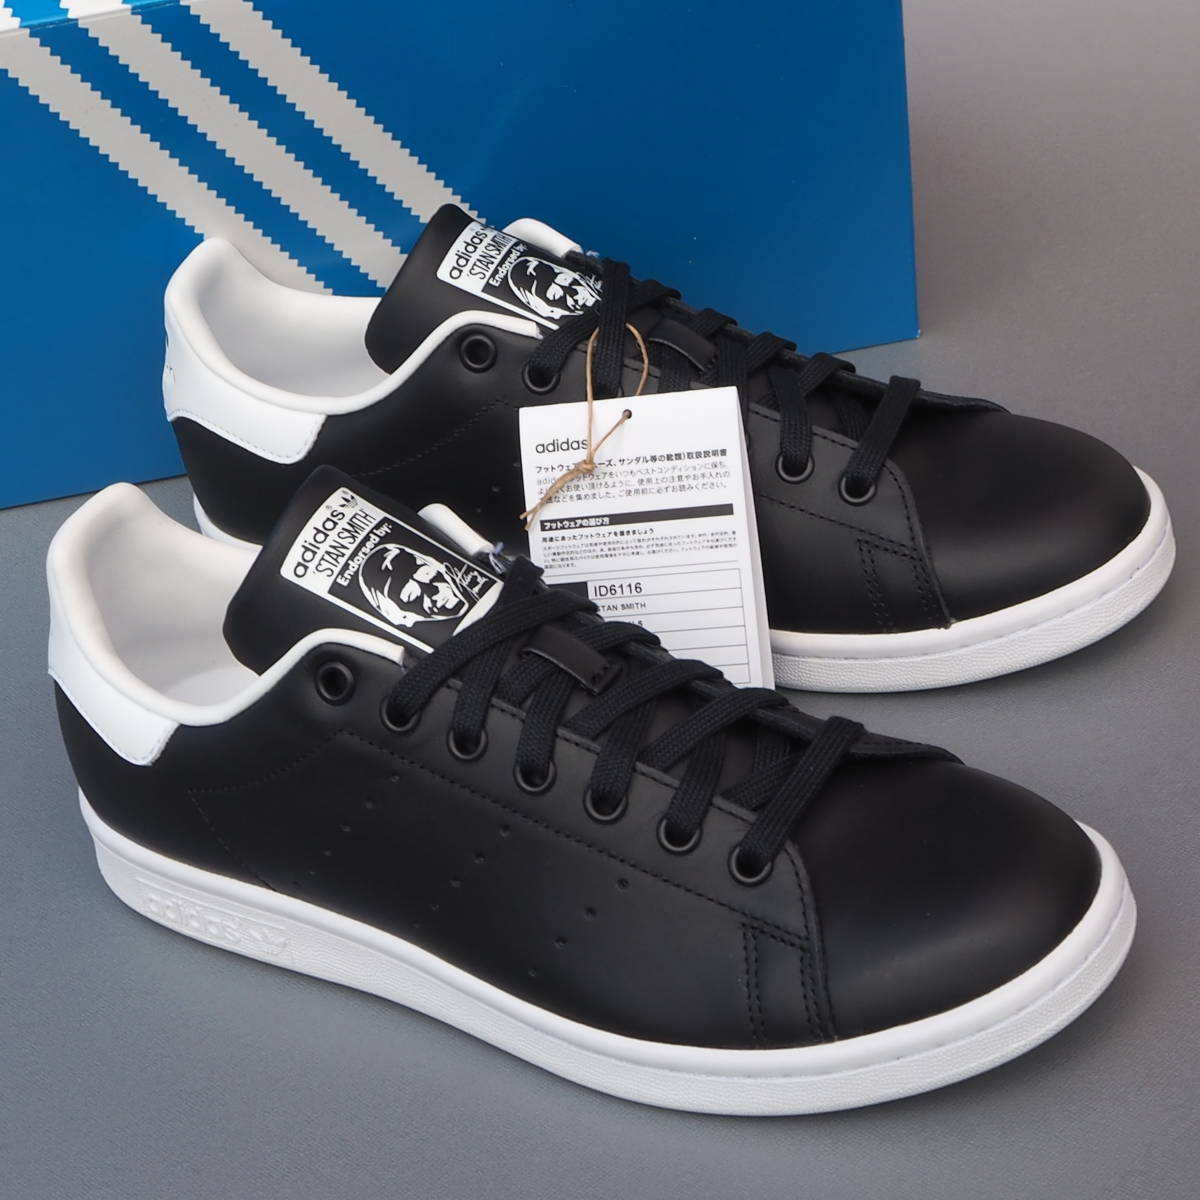  dead!! US 8 1/2/ 26,5cm new goods!! limitation 23 year made adidas Originals STAN SMITH Stansmith black natural leather 